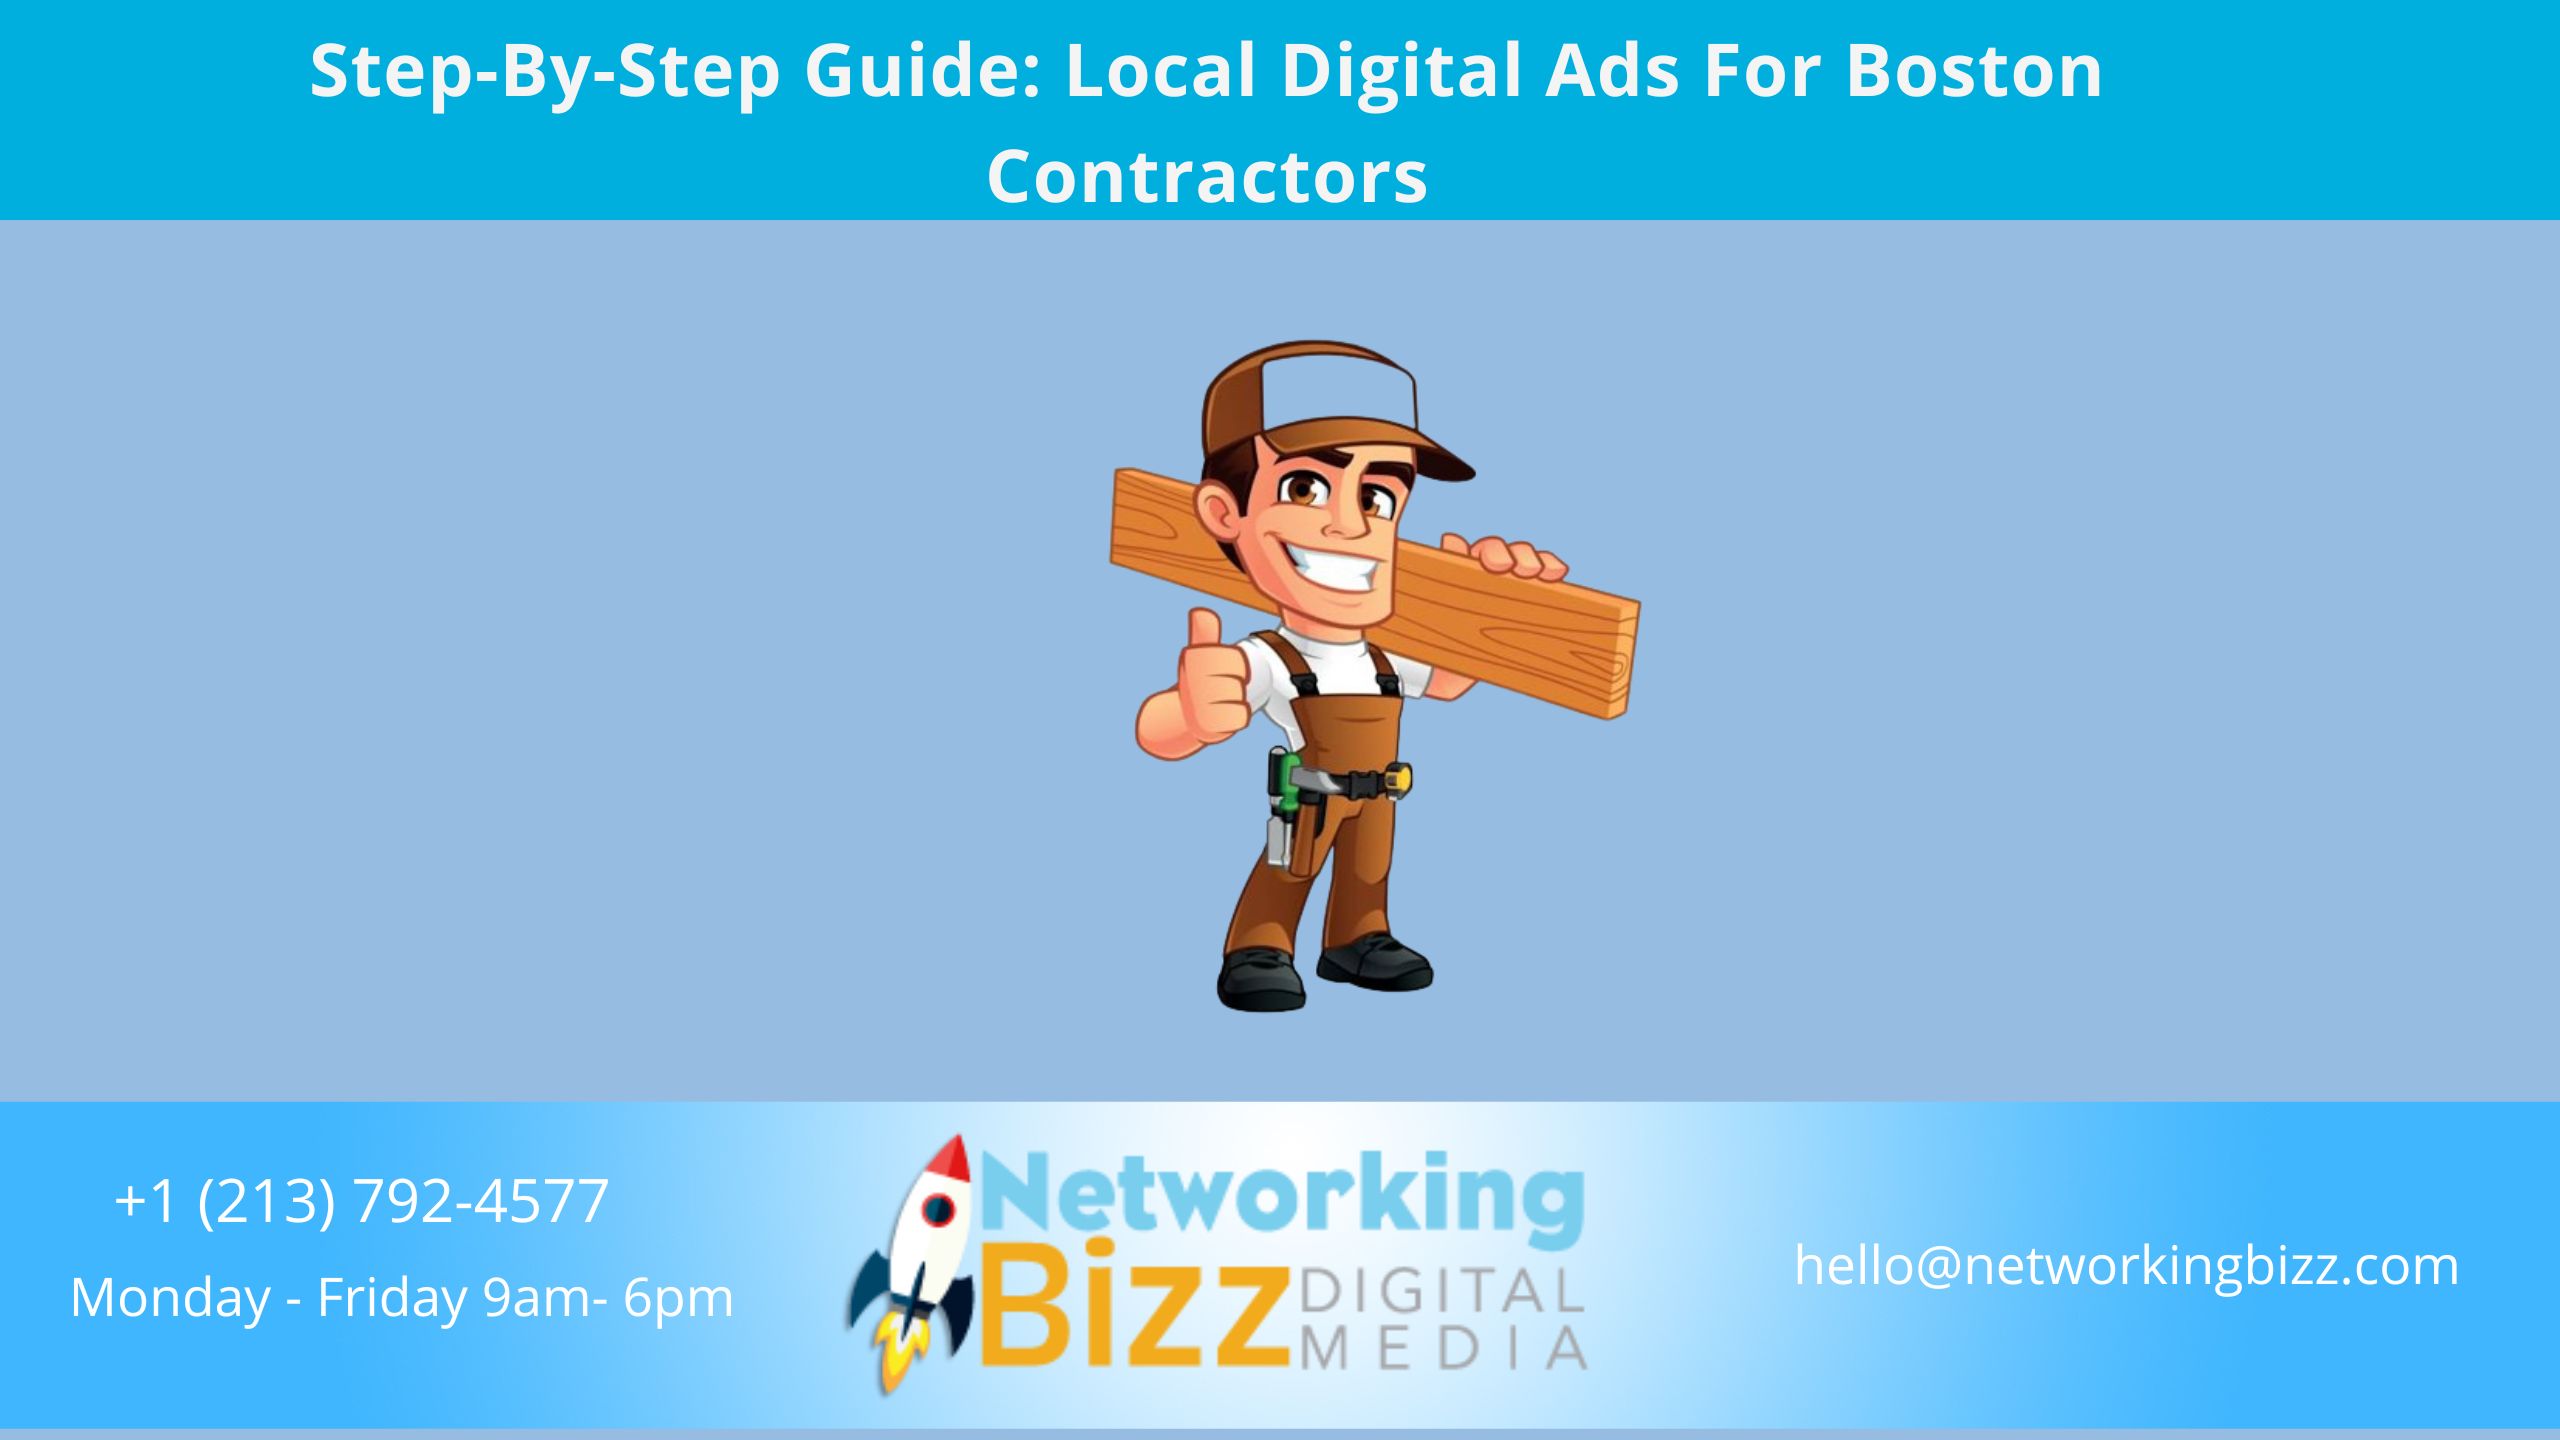 Step-By-Step Guide: Local Digital Ads For Boston Contractors